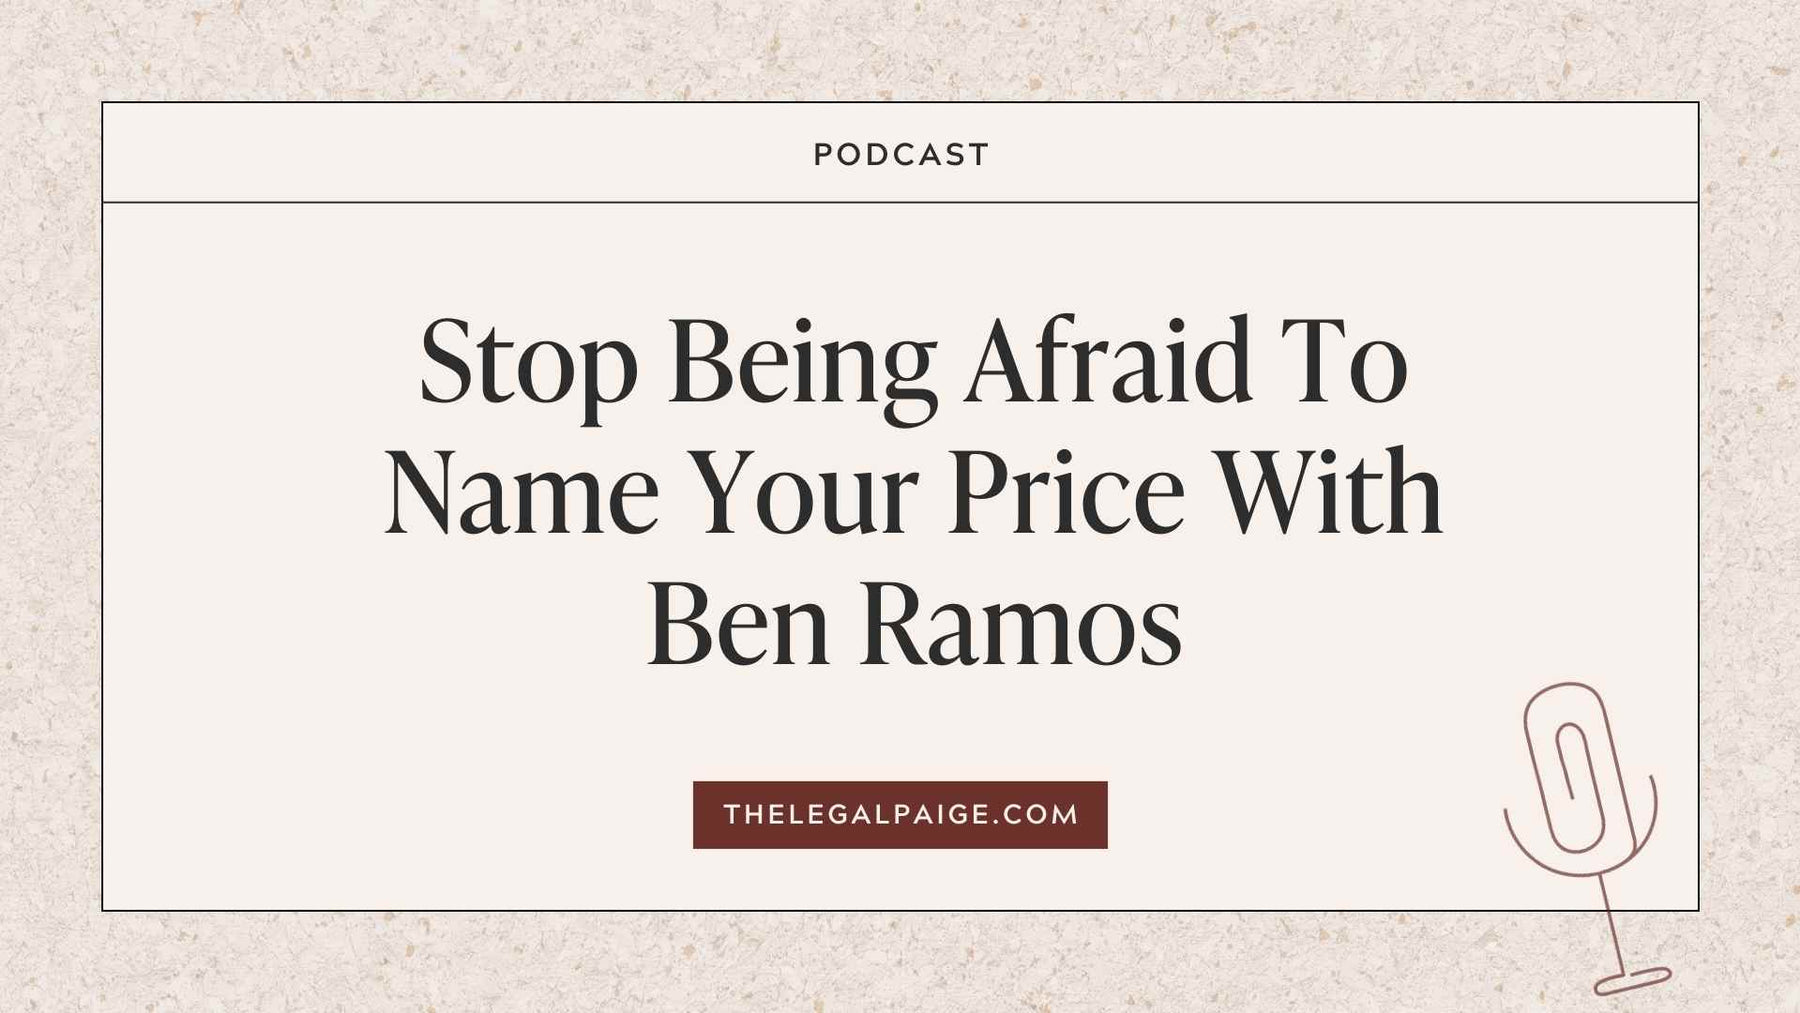 Episode 83: Stop Being Afraid To Name Your Price With Ben Ramos